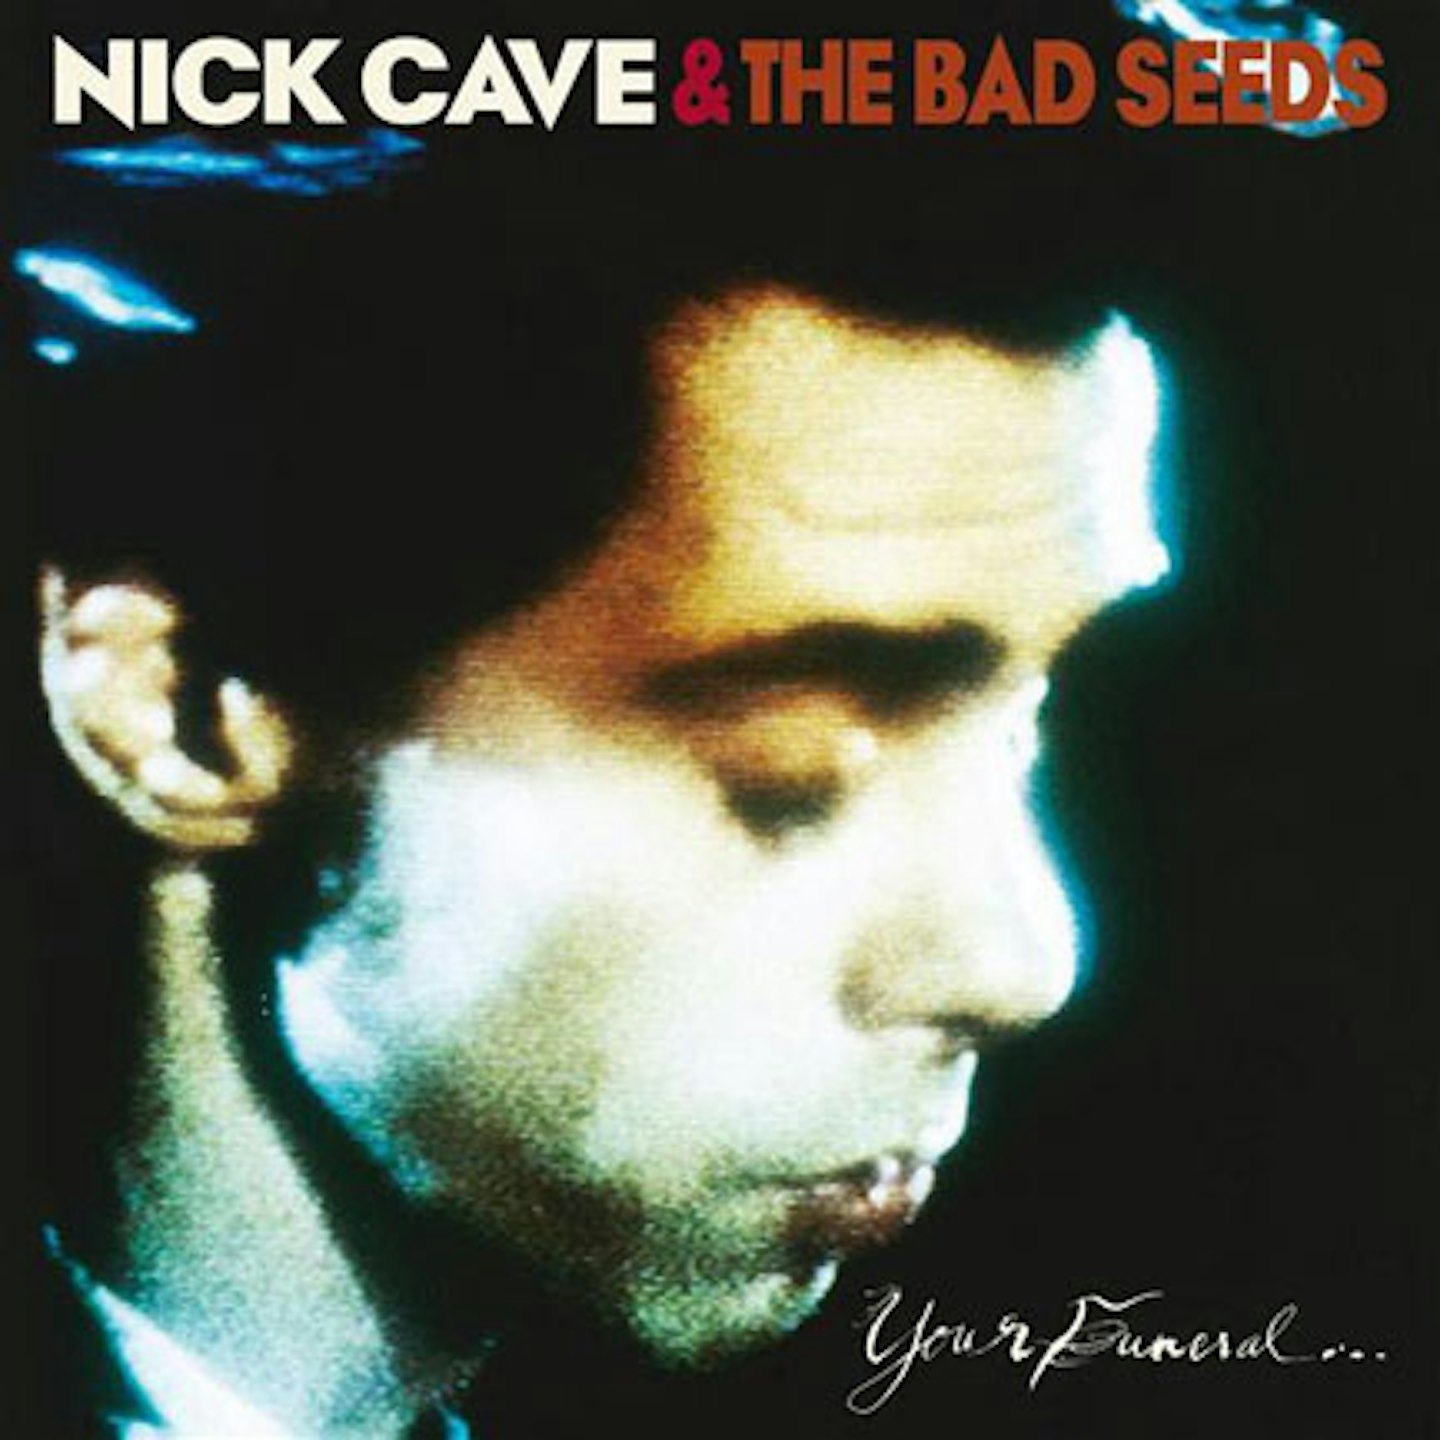 10. Your Funeral... My Trial - Nick Cave & The Bad Seeds